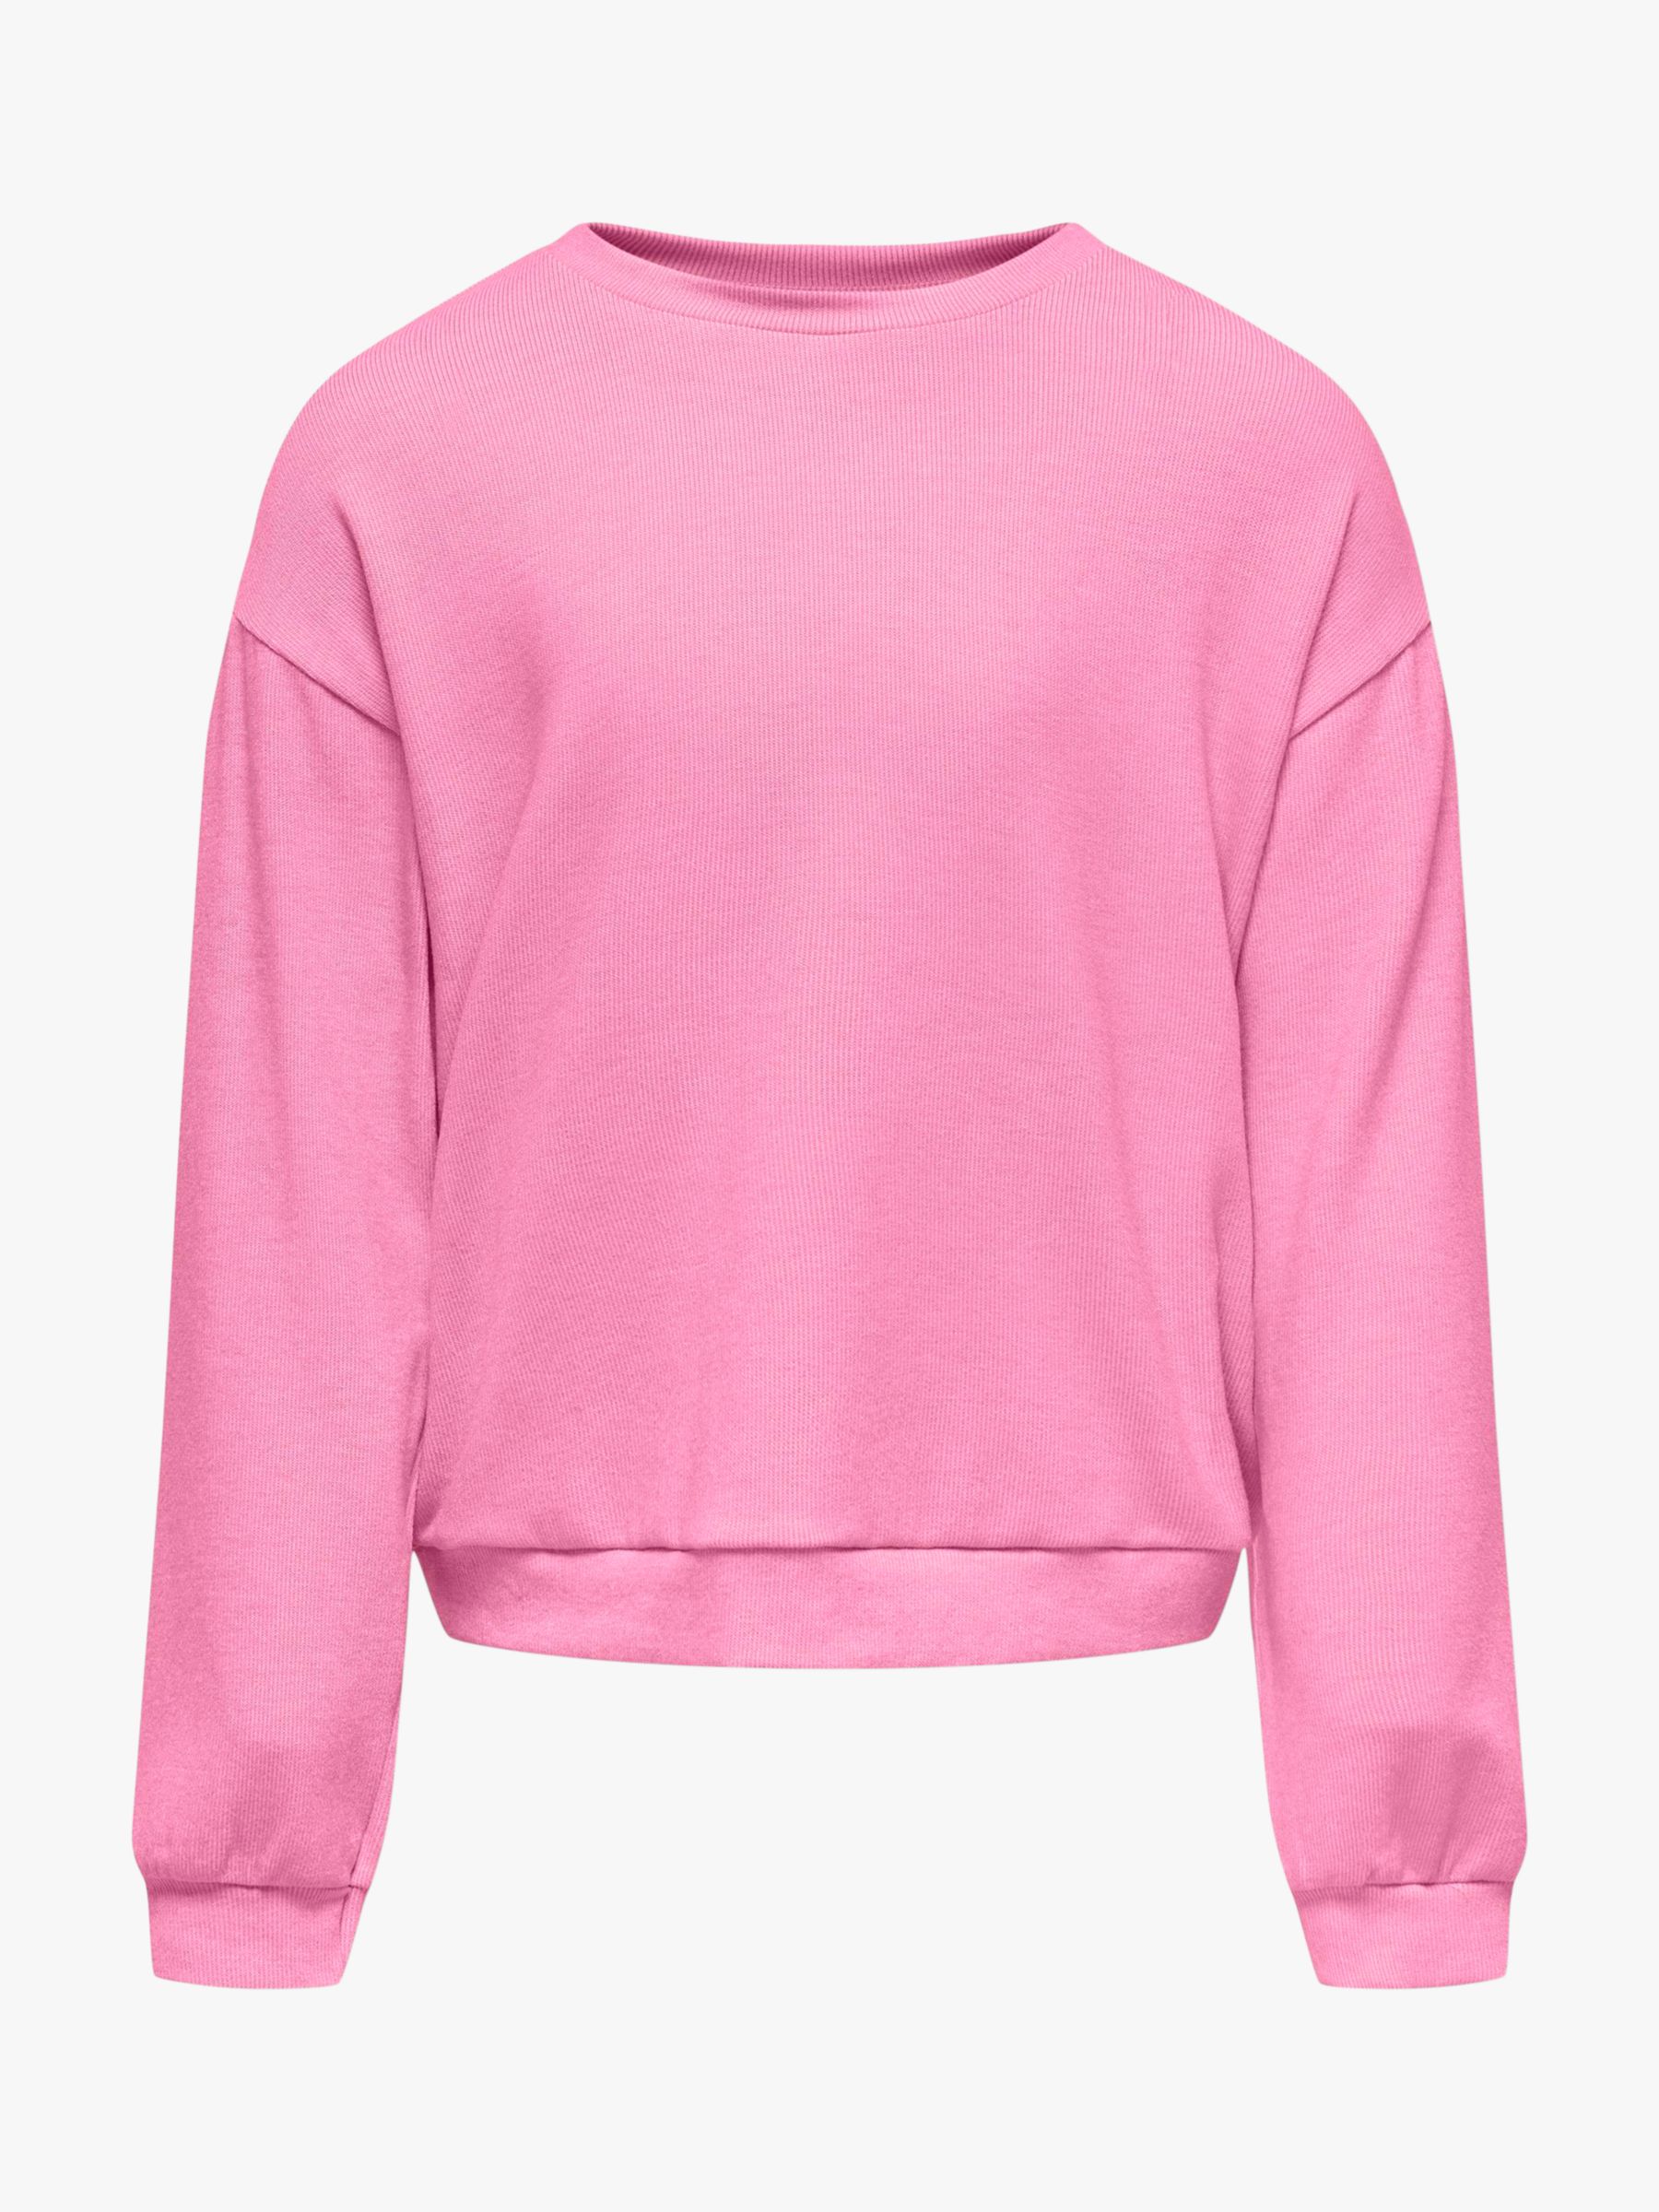 Buy KIDS ONLY Kids' Soft Touch Cosy Sweatshirt, Pink Online at johnlewis.com